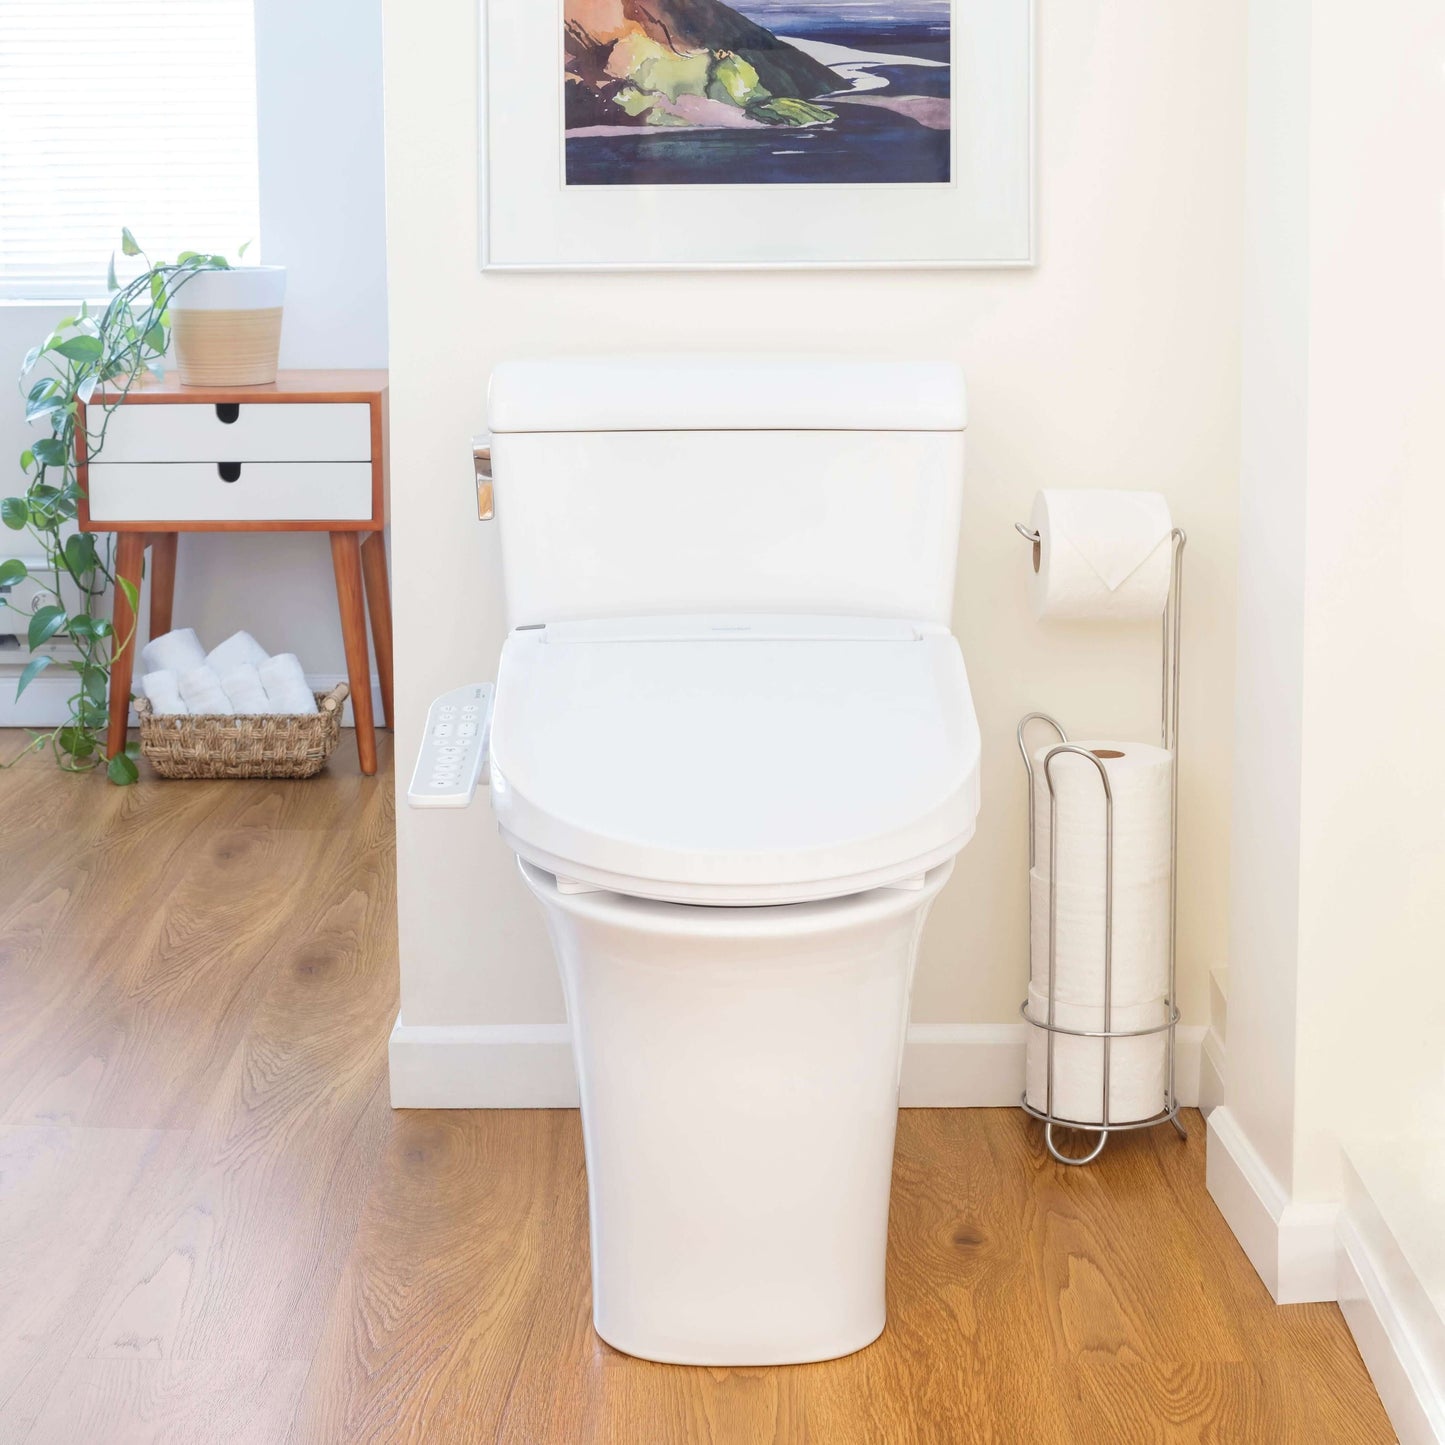 Swash Select DR801 Bidet Seat - front view attached to a toilet in a bathroom 